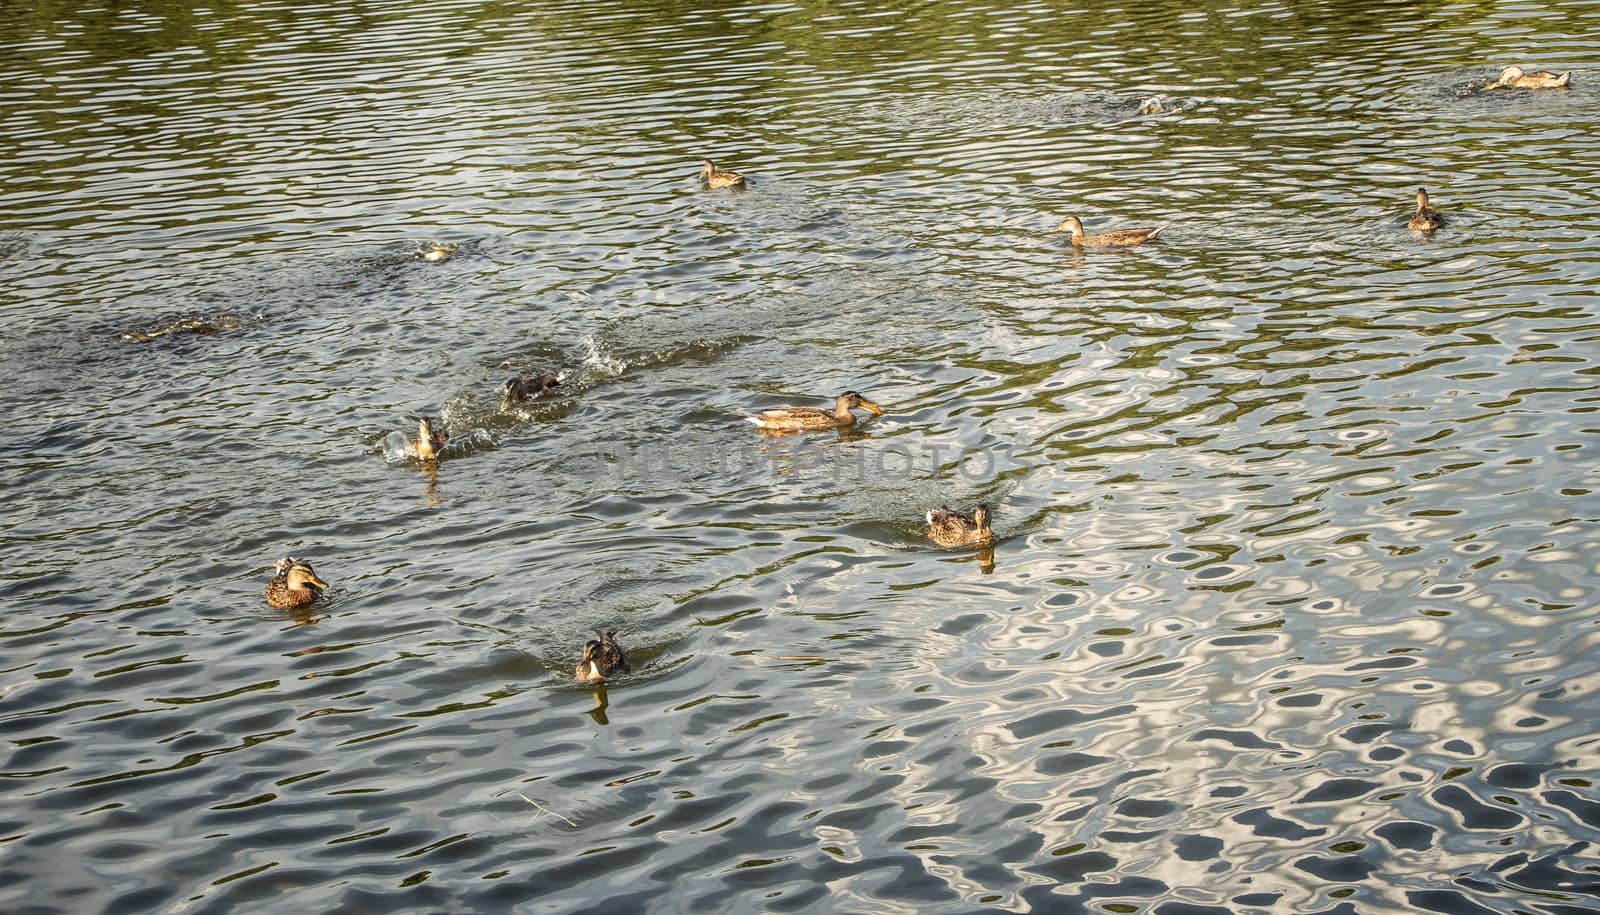 A group of ducks swimming in the lake by Mindru